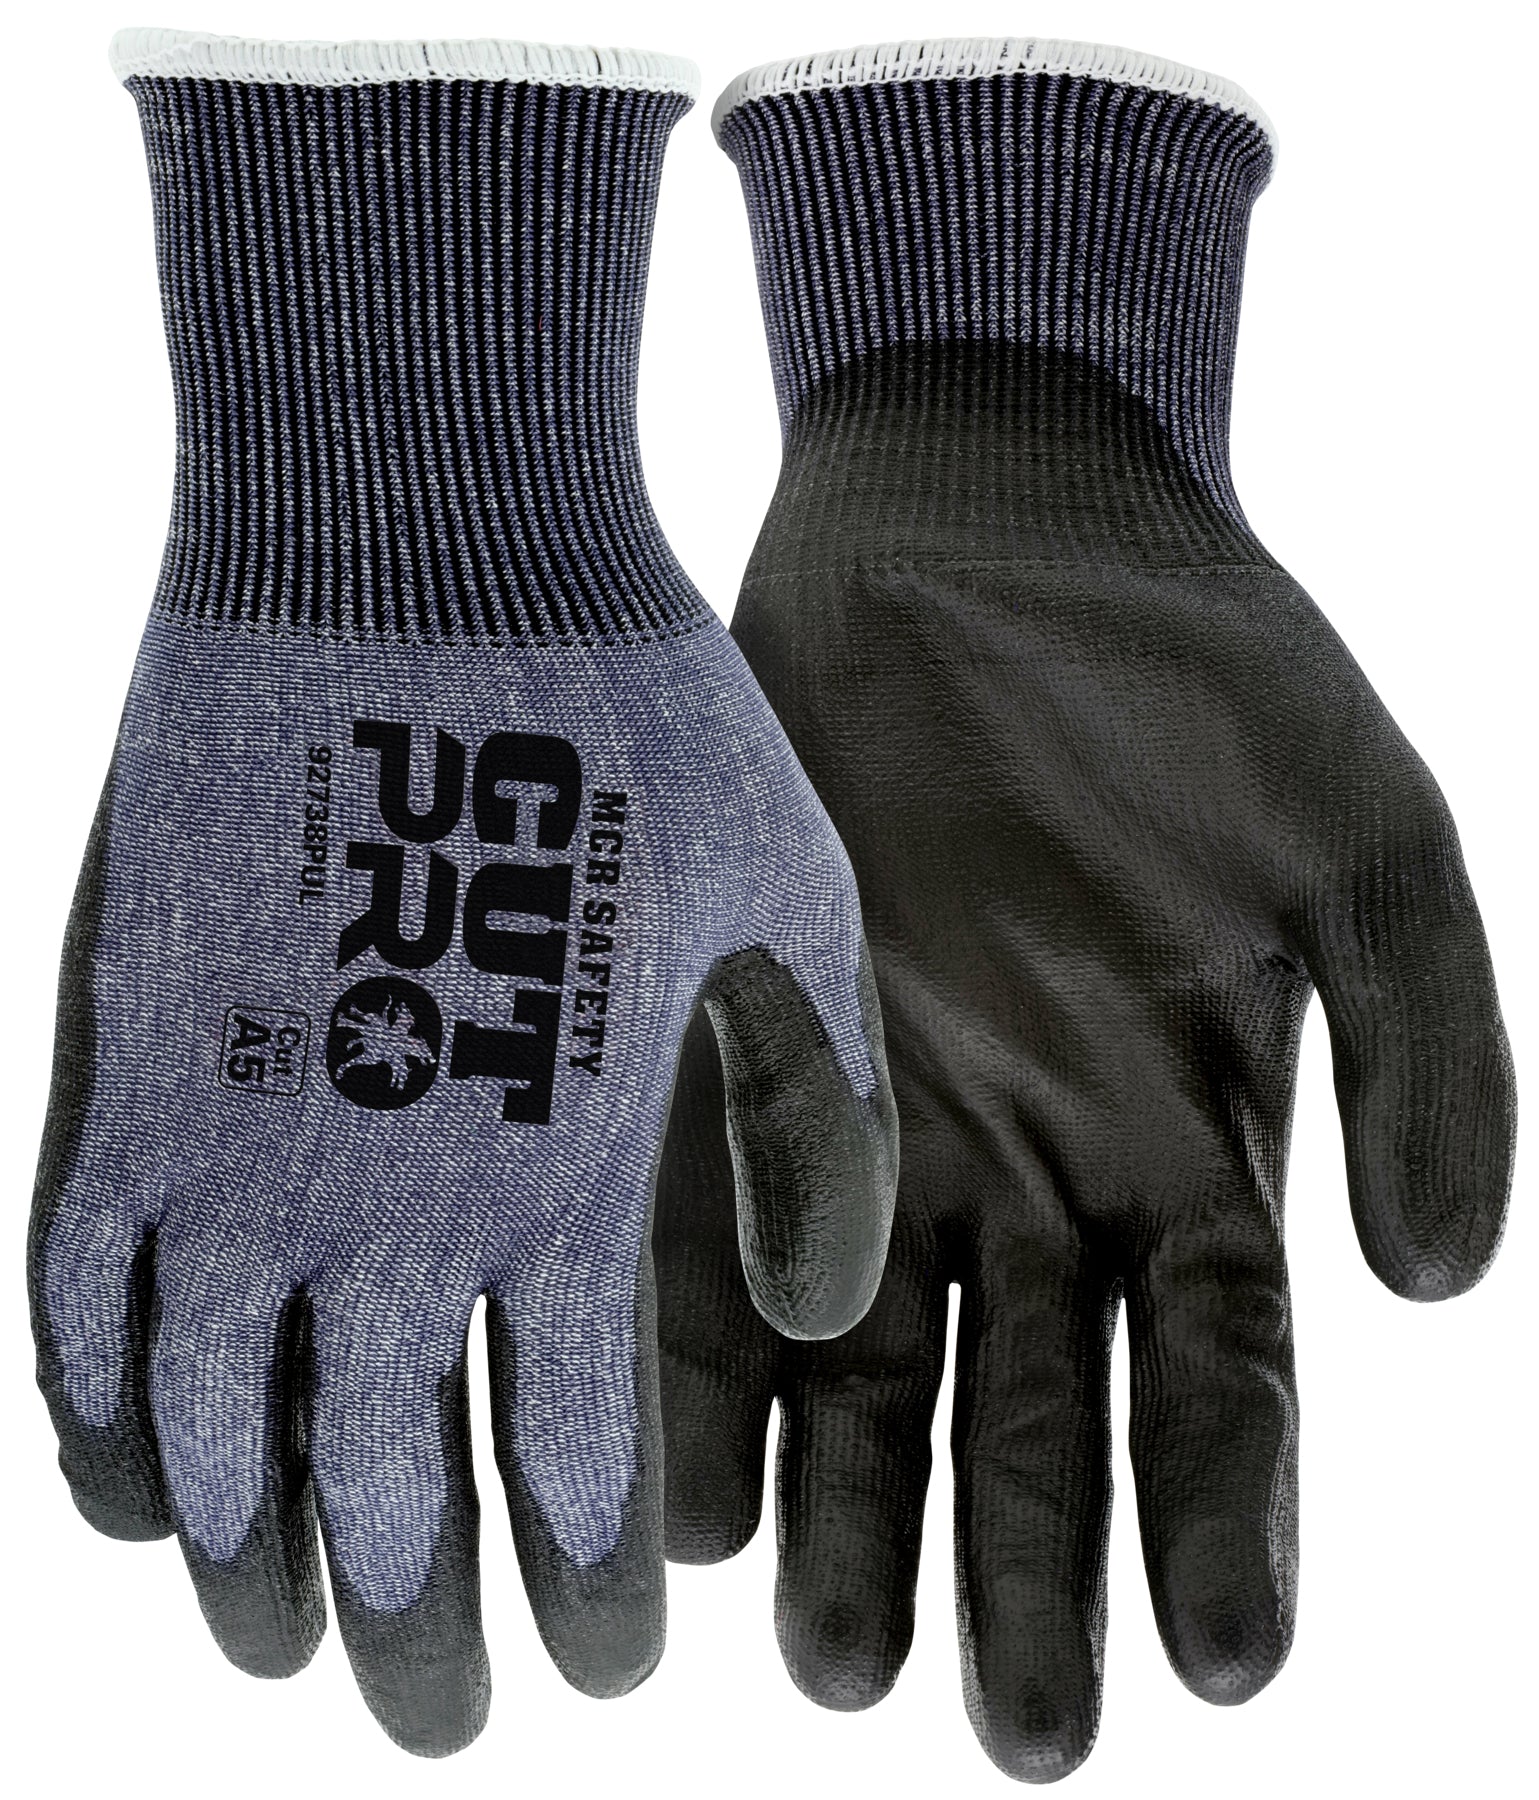 Memphis Cut Pro Cut Resistant Synthetic Shell Gloves - 92733PU